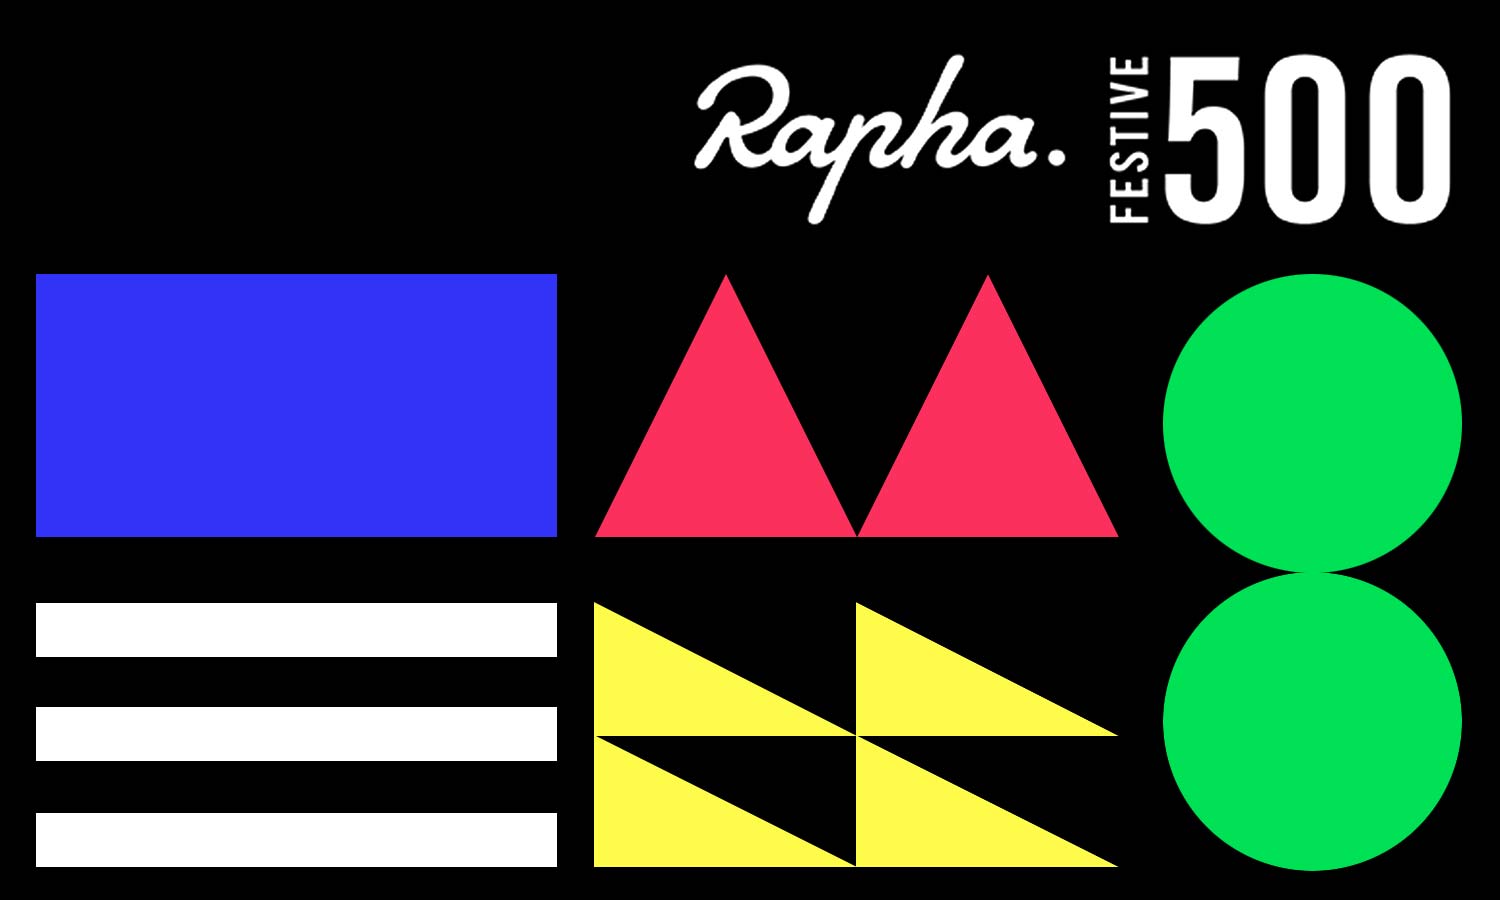 Rapha Festive 500, stay fit through the holidays, win gear!